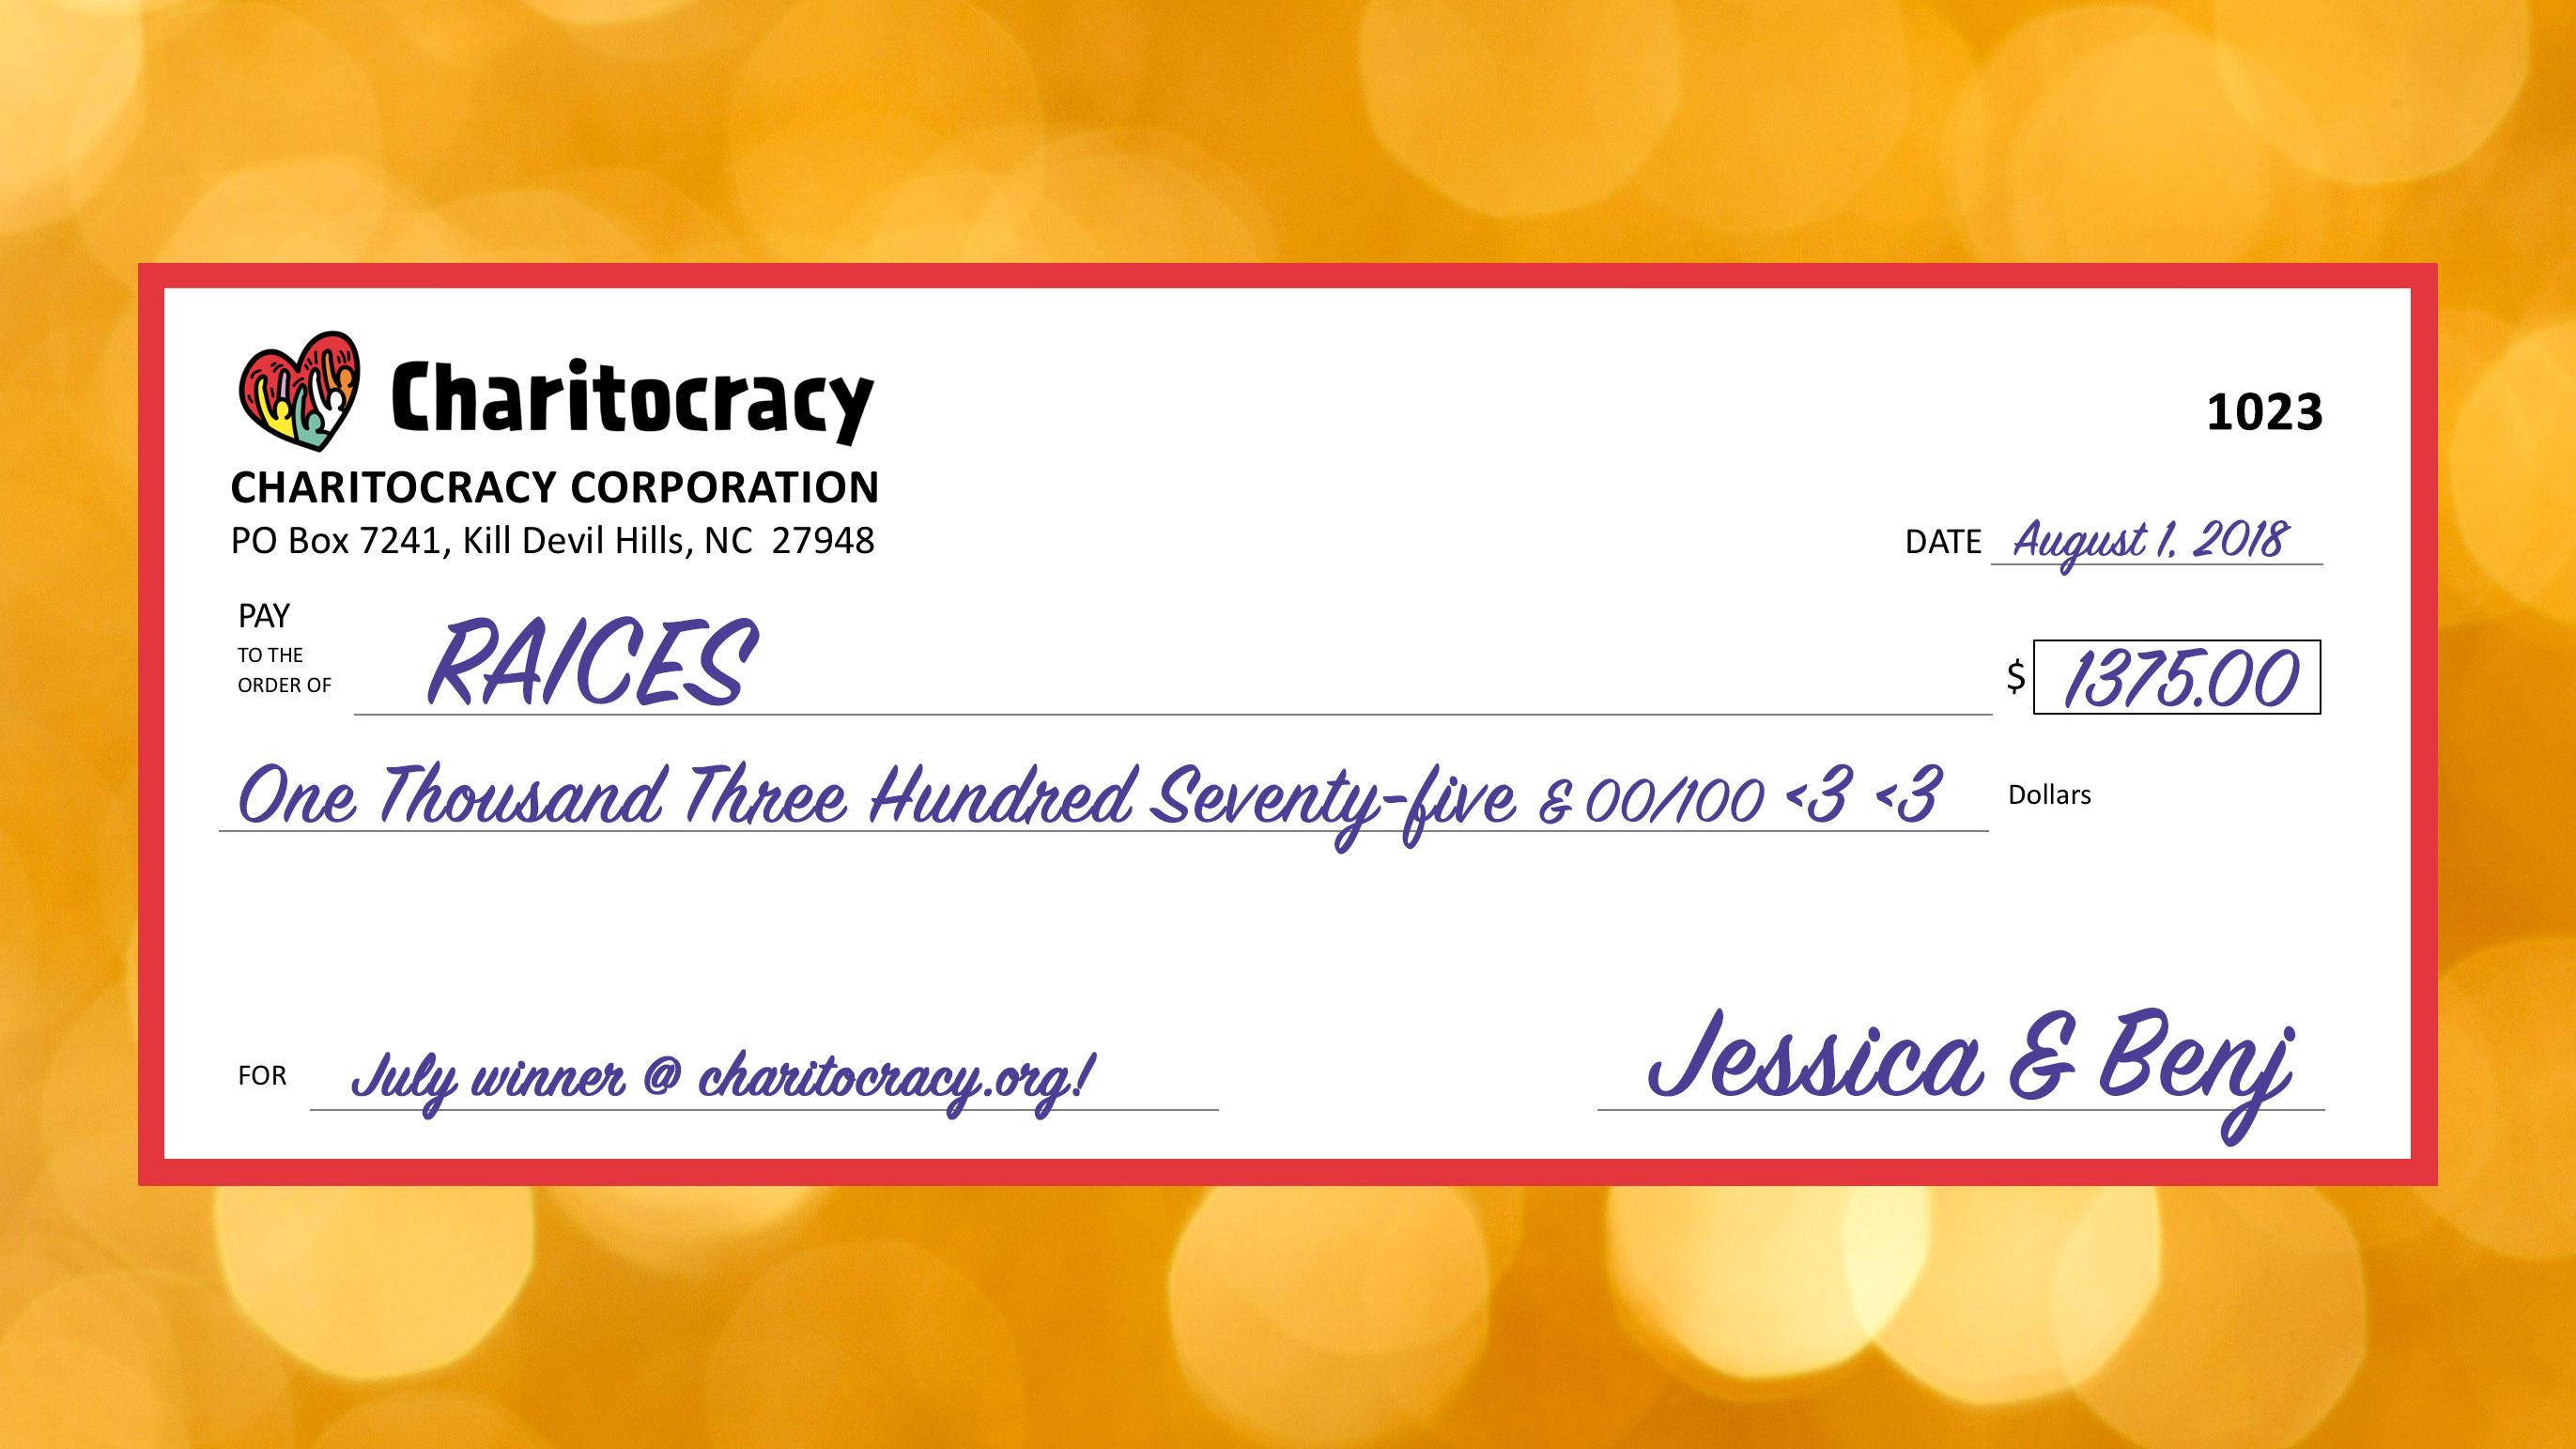 Charitocracy's 23rd check to July winner RAICES for $1375